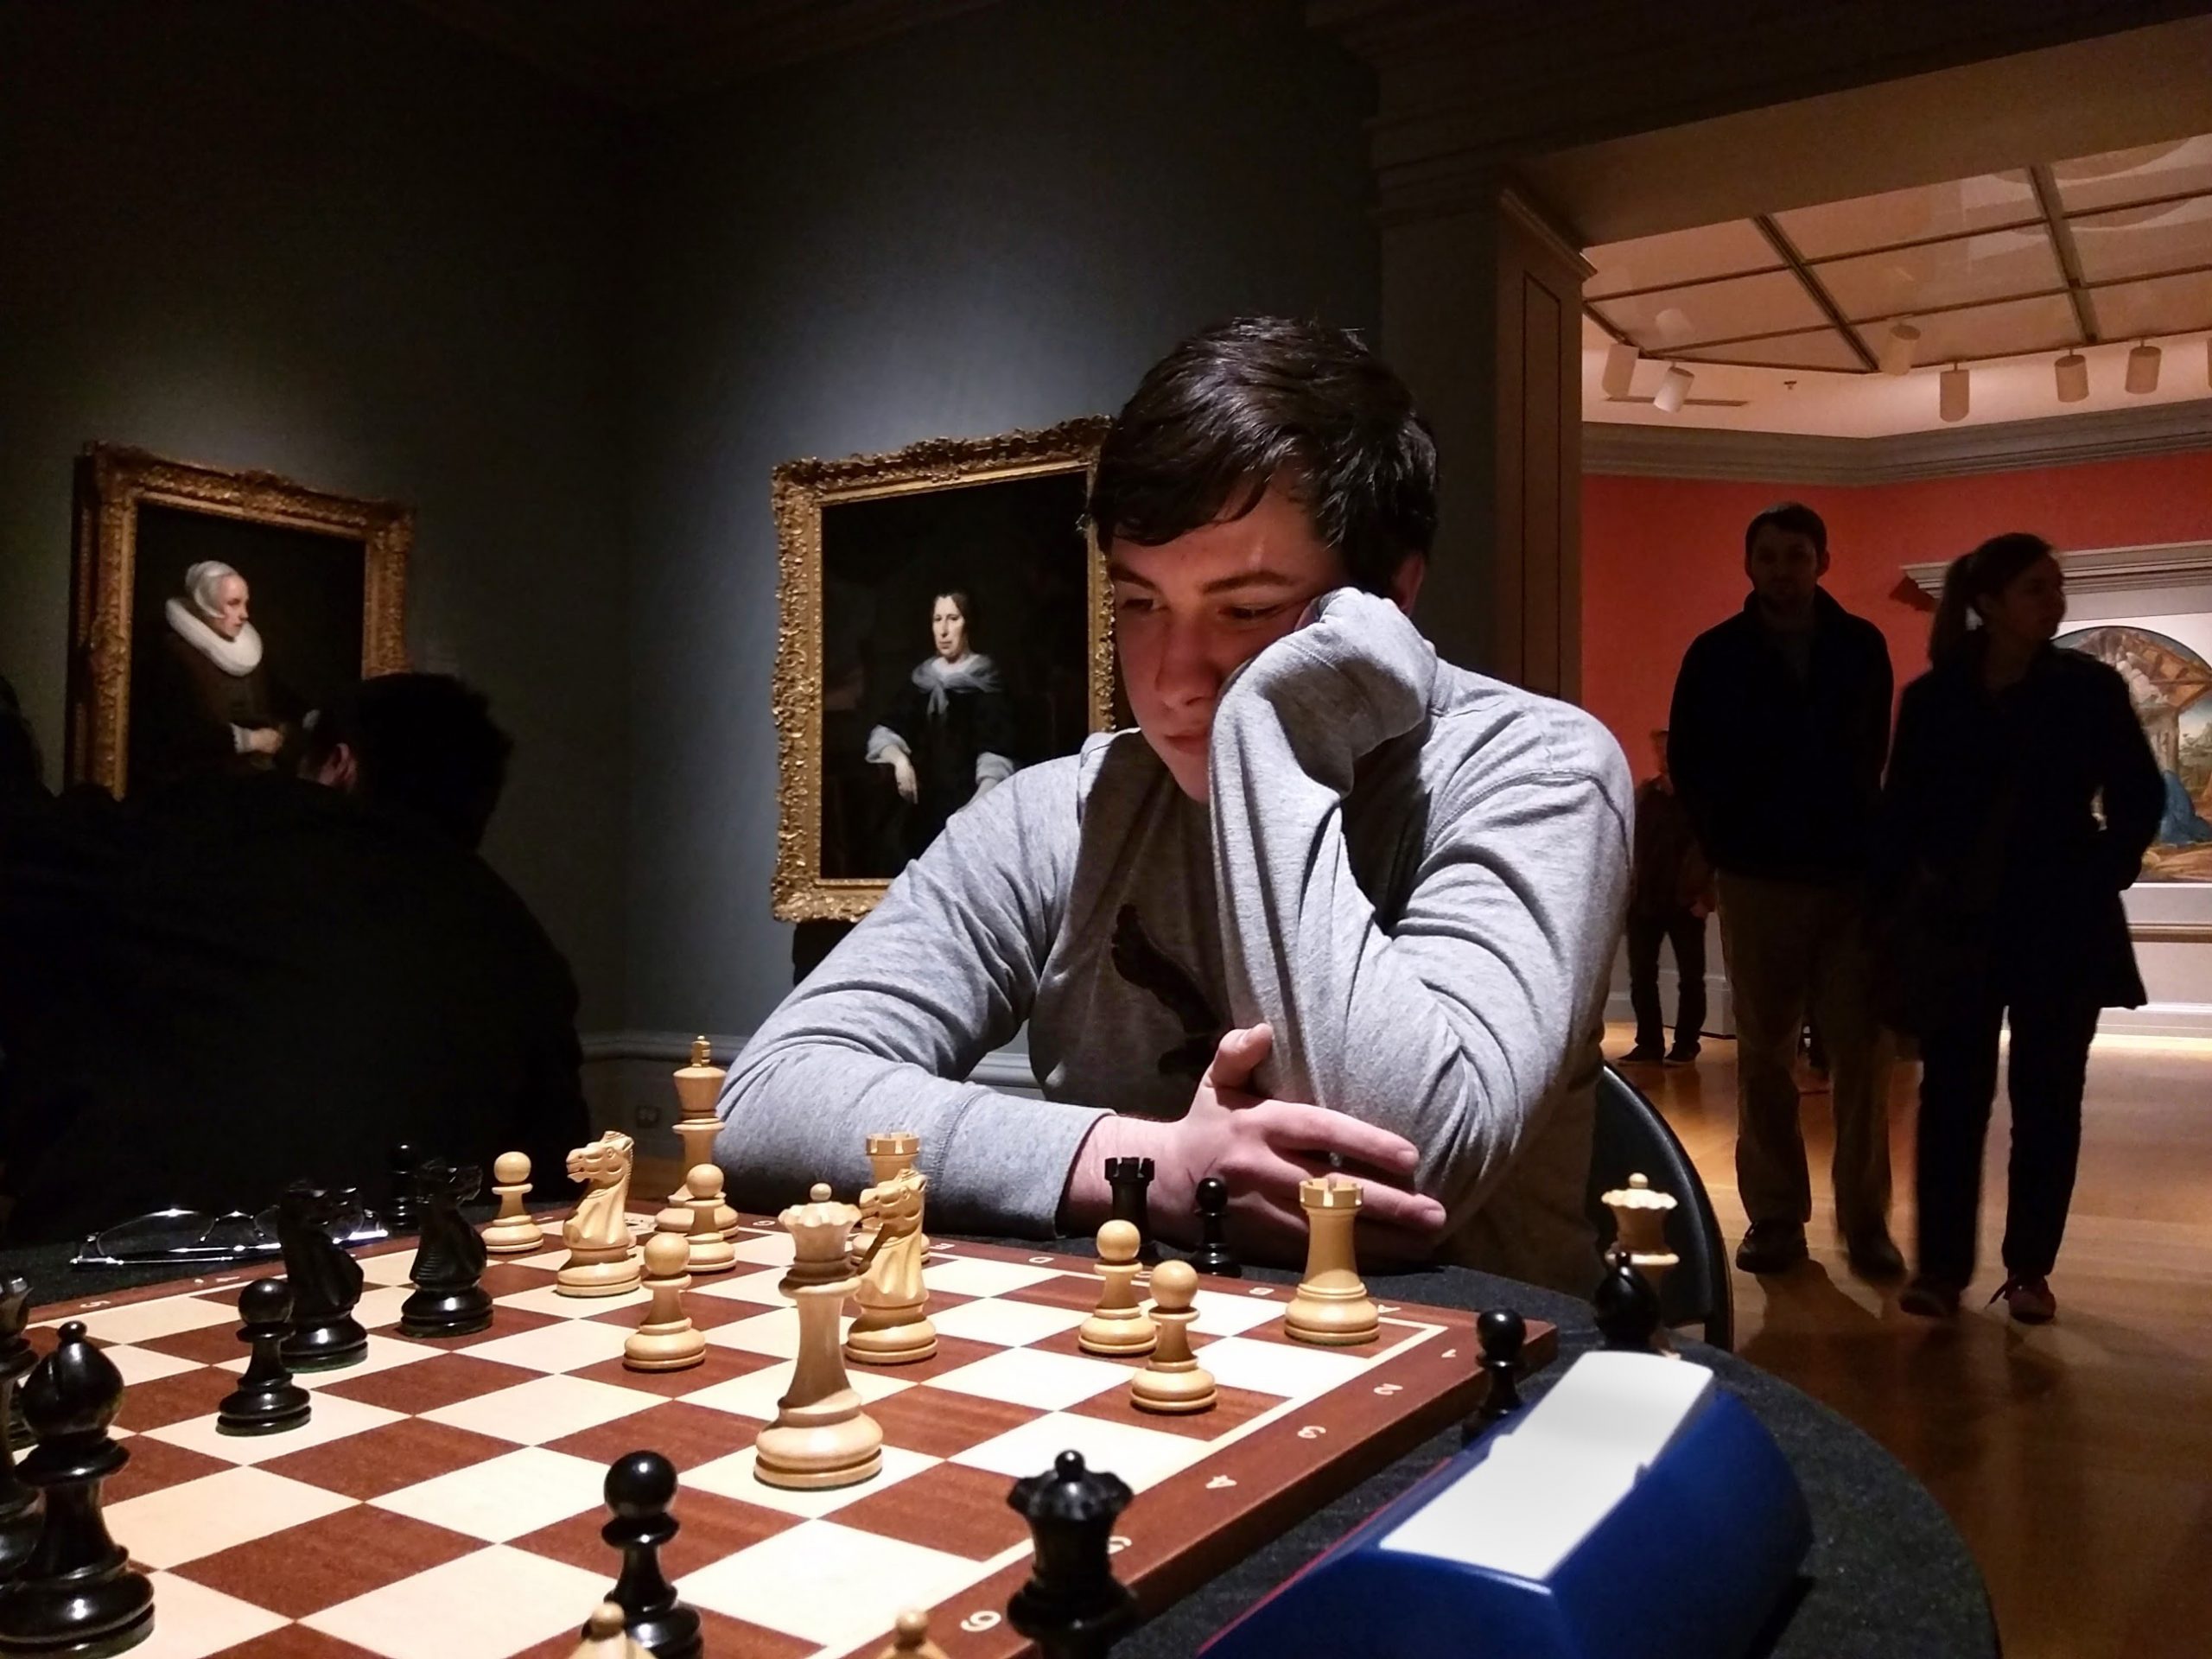 Chess competition, like the game itself, began long ago. The first official world championship took place in 1886 in the United States. Only .3 percent of the chess players in the world are grandmasters. Ian Bell in play at the Columbia Museum of Art. 